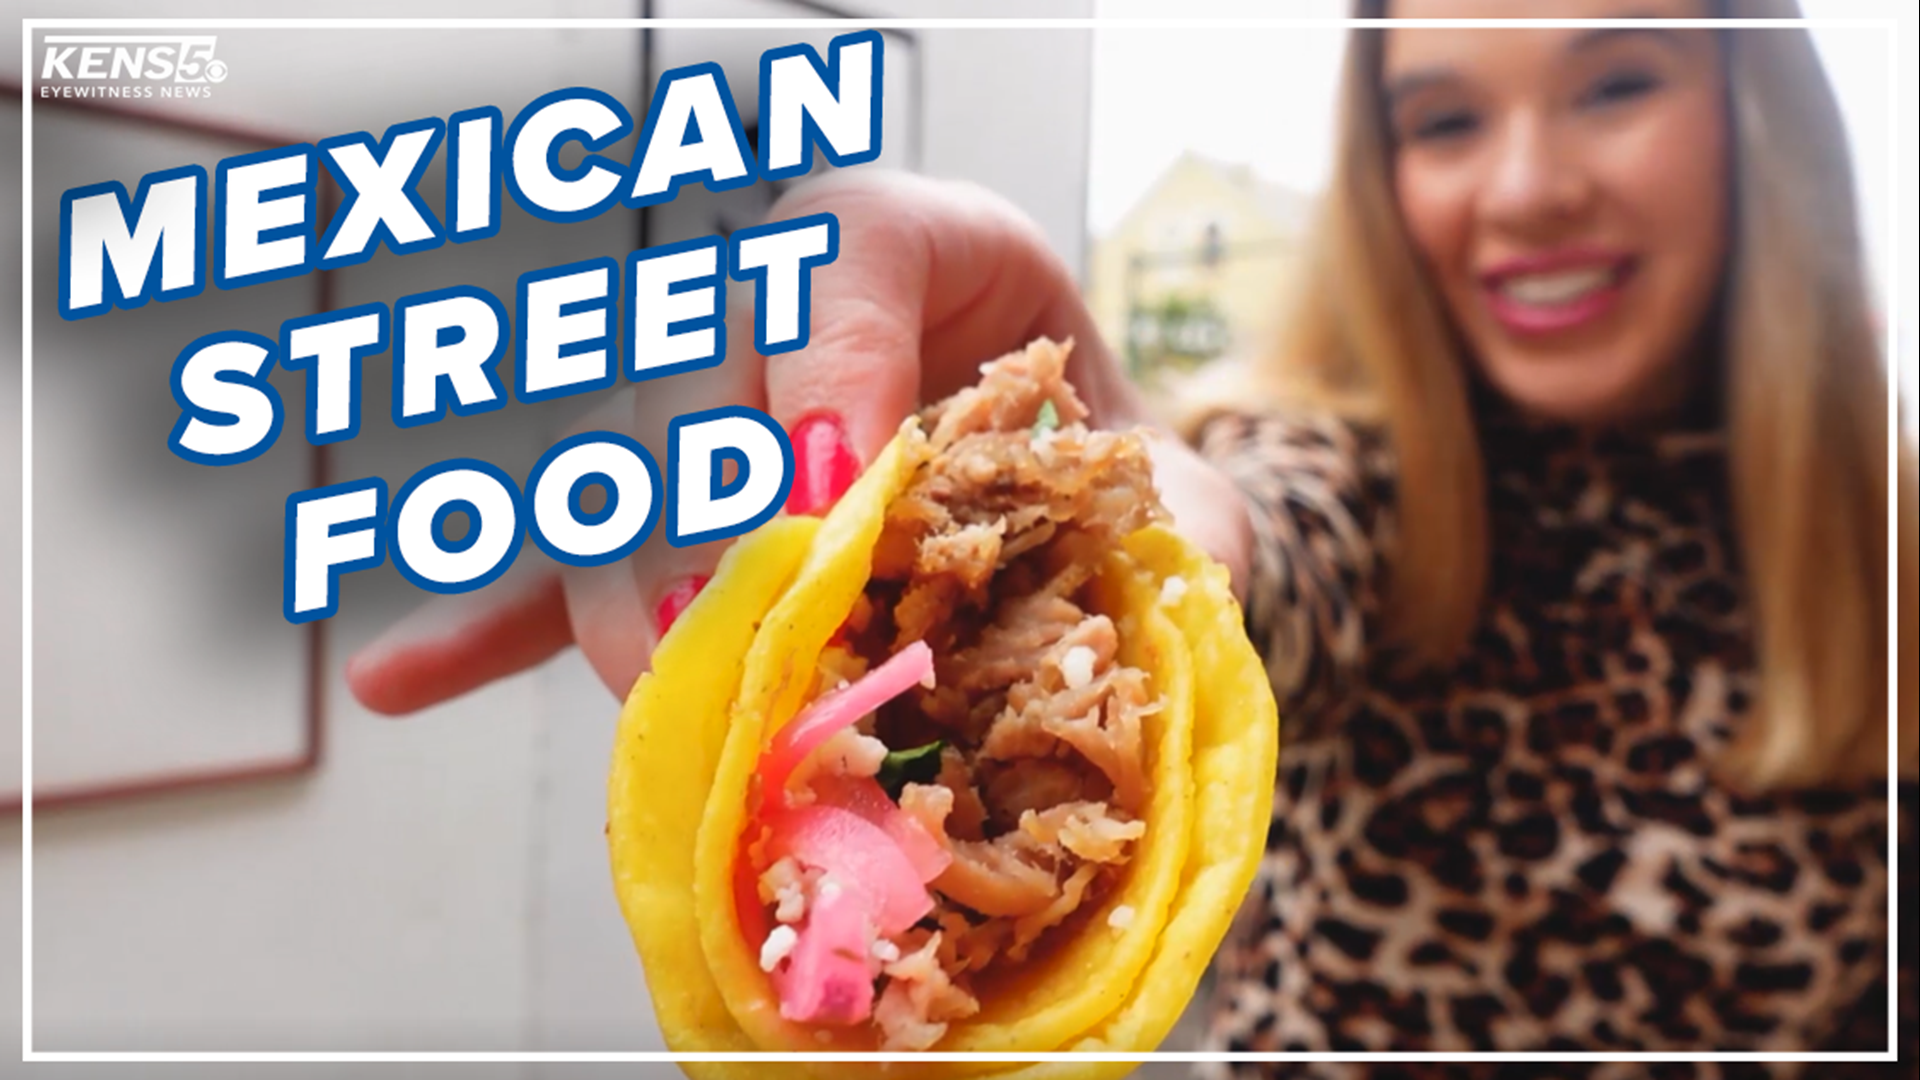 If you've been searching for authentic Mexican street food, you might like a new local business called Milpa. Digital reporter Lexi Hazlett takes you there.